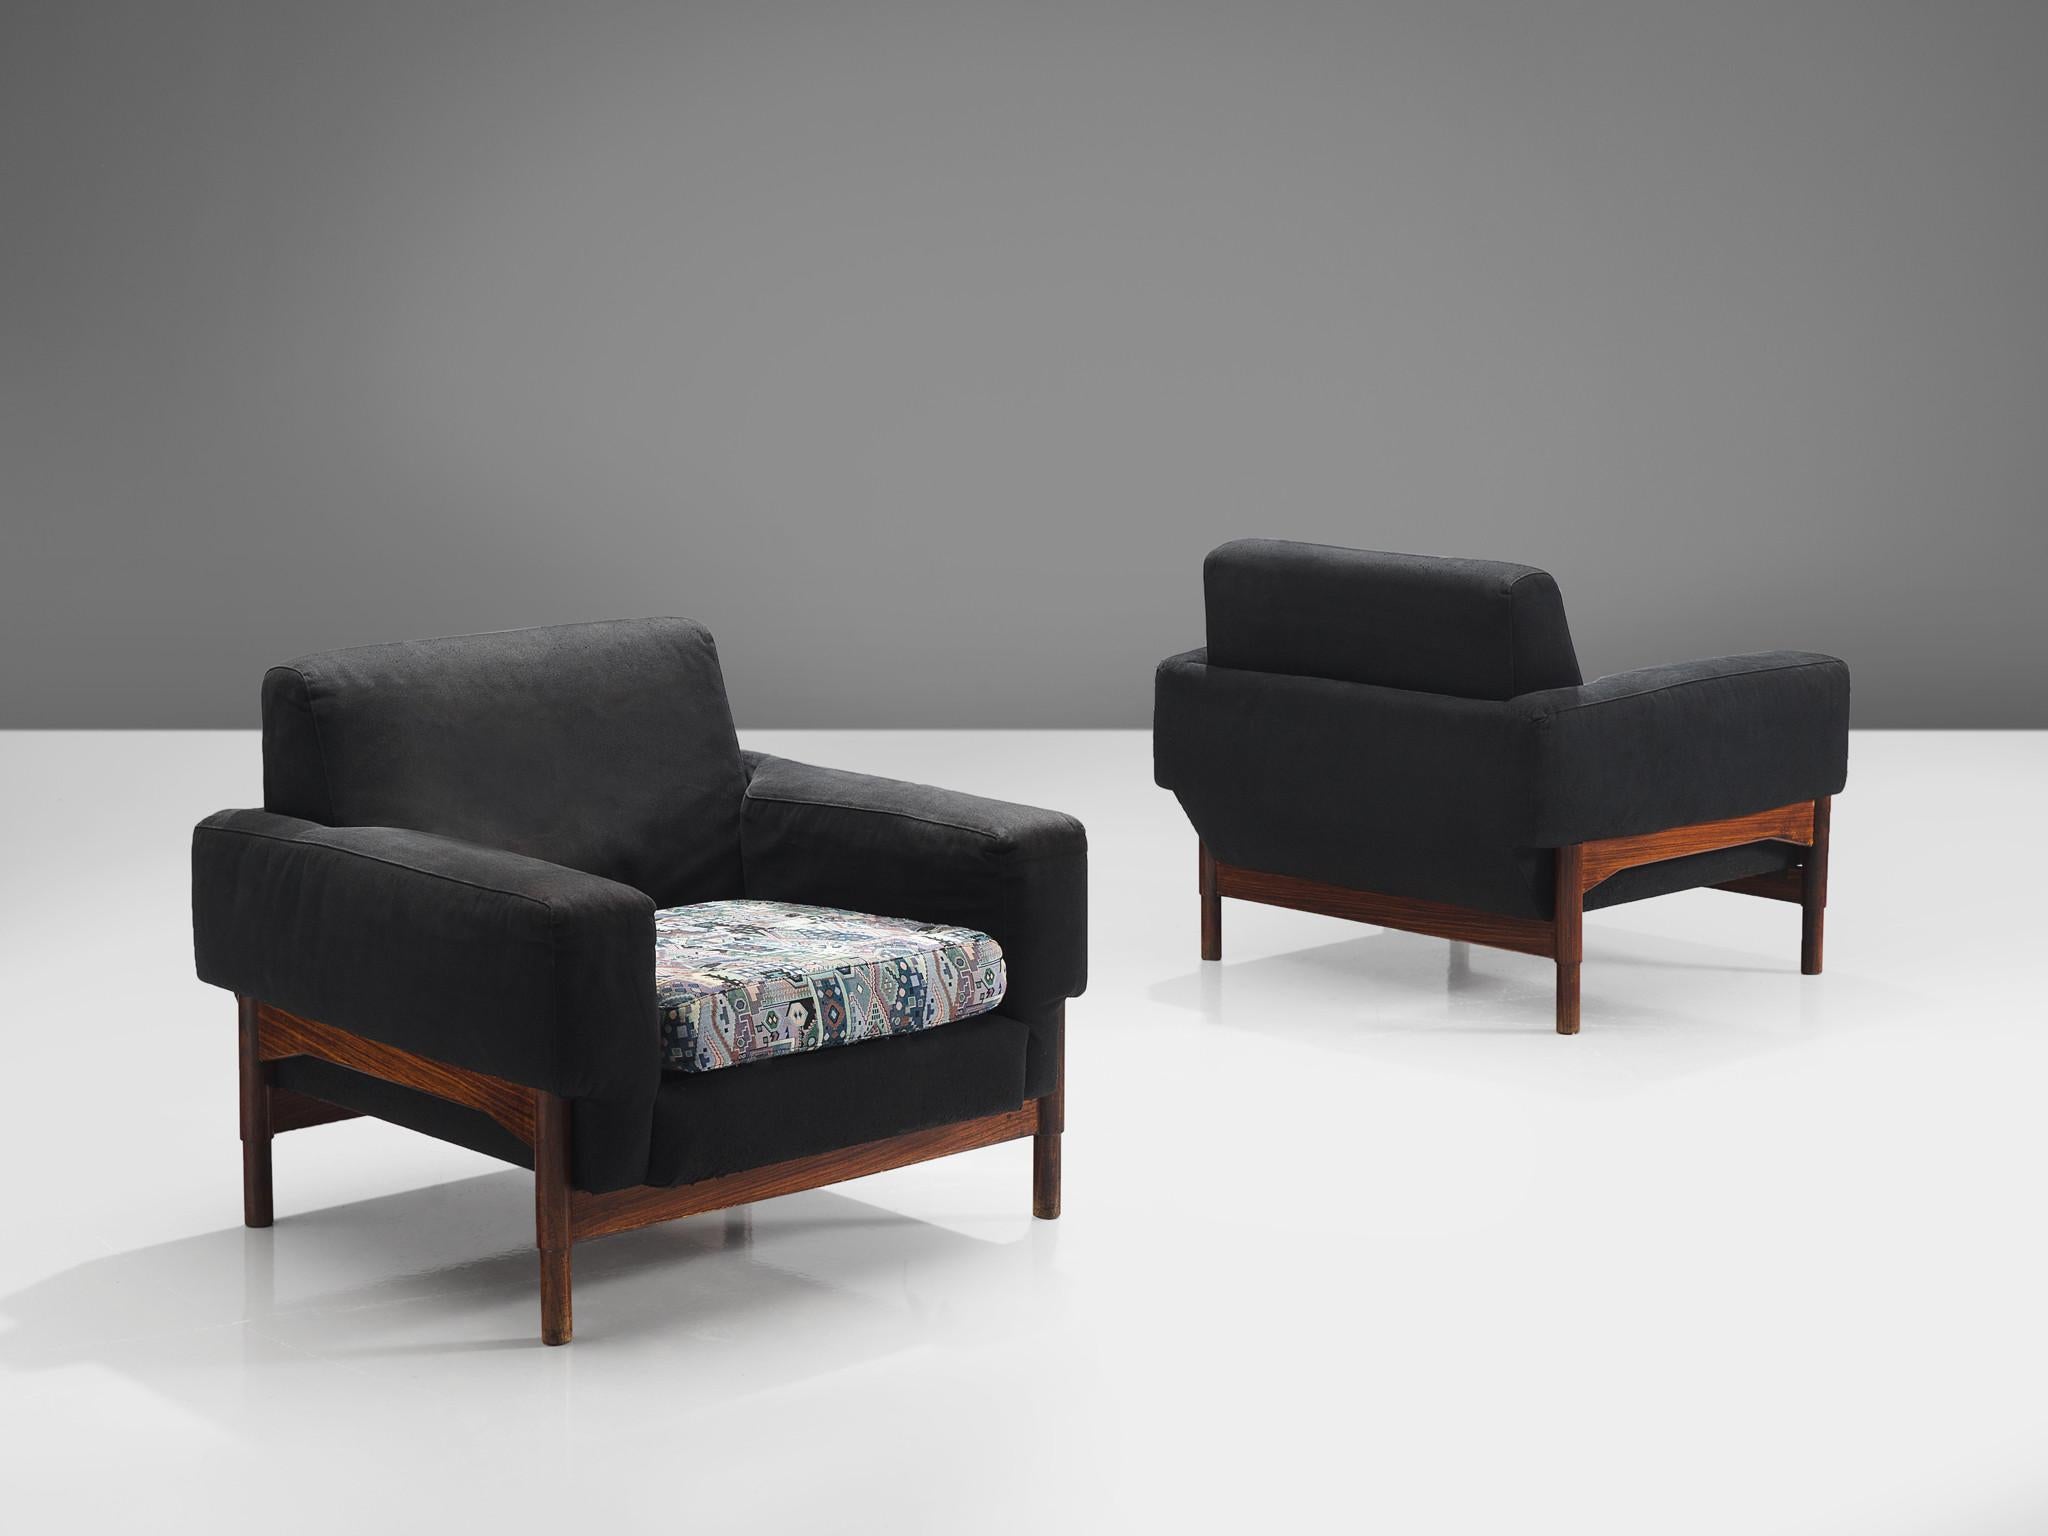 Pair of lounge chairs in black and graphic upholstery, rosewood, Italy, 1970s.

This elegant, geometric pair of lounge chairs feature a graphic pattern on the seat and a black fabric on the rest of the chair. The eloquent detail on these chairs is